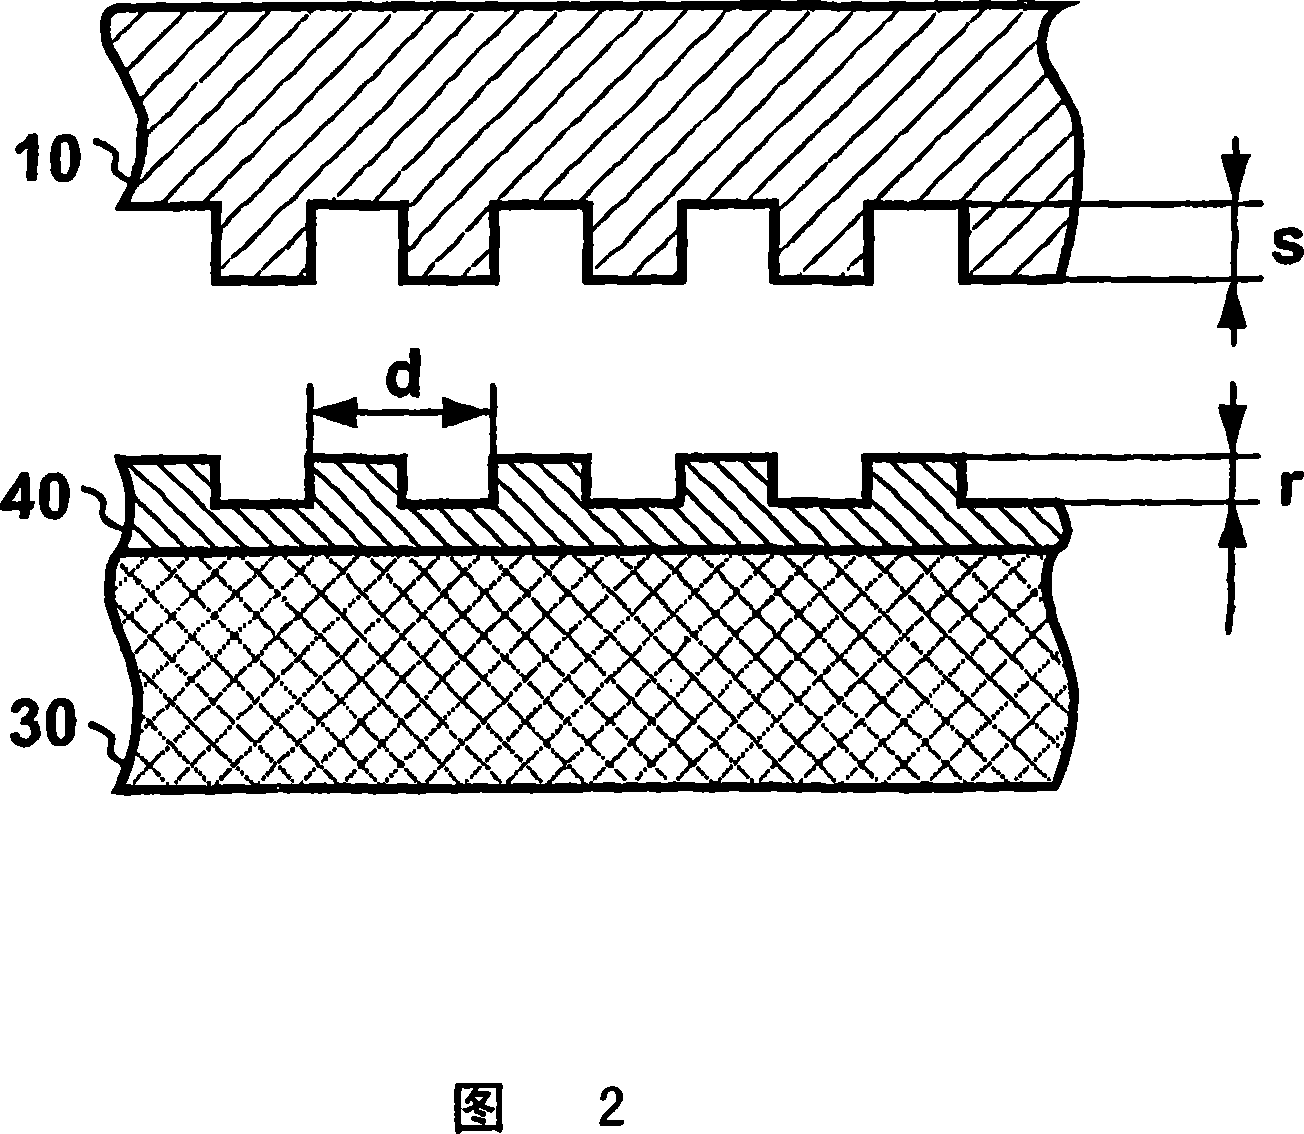 Embossing device with a deflection compensated roller